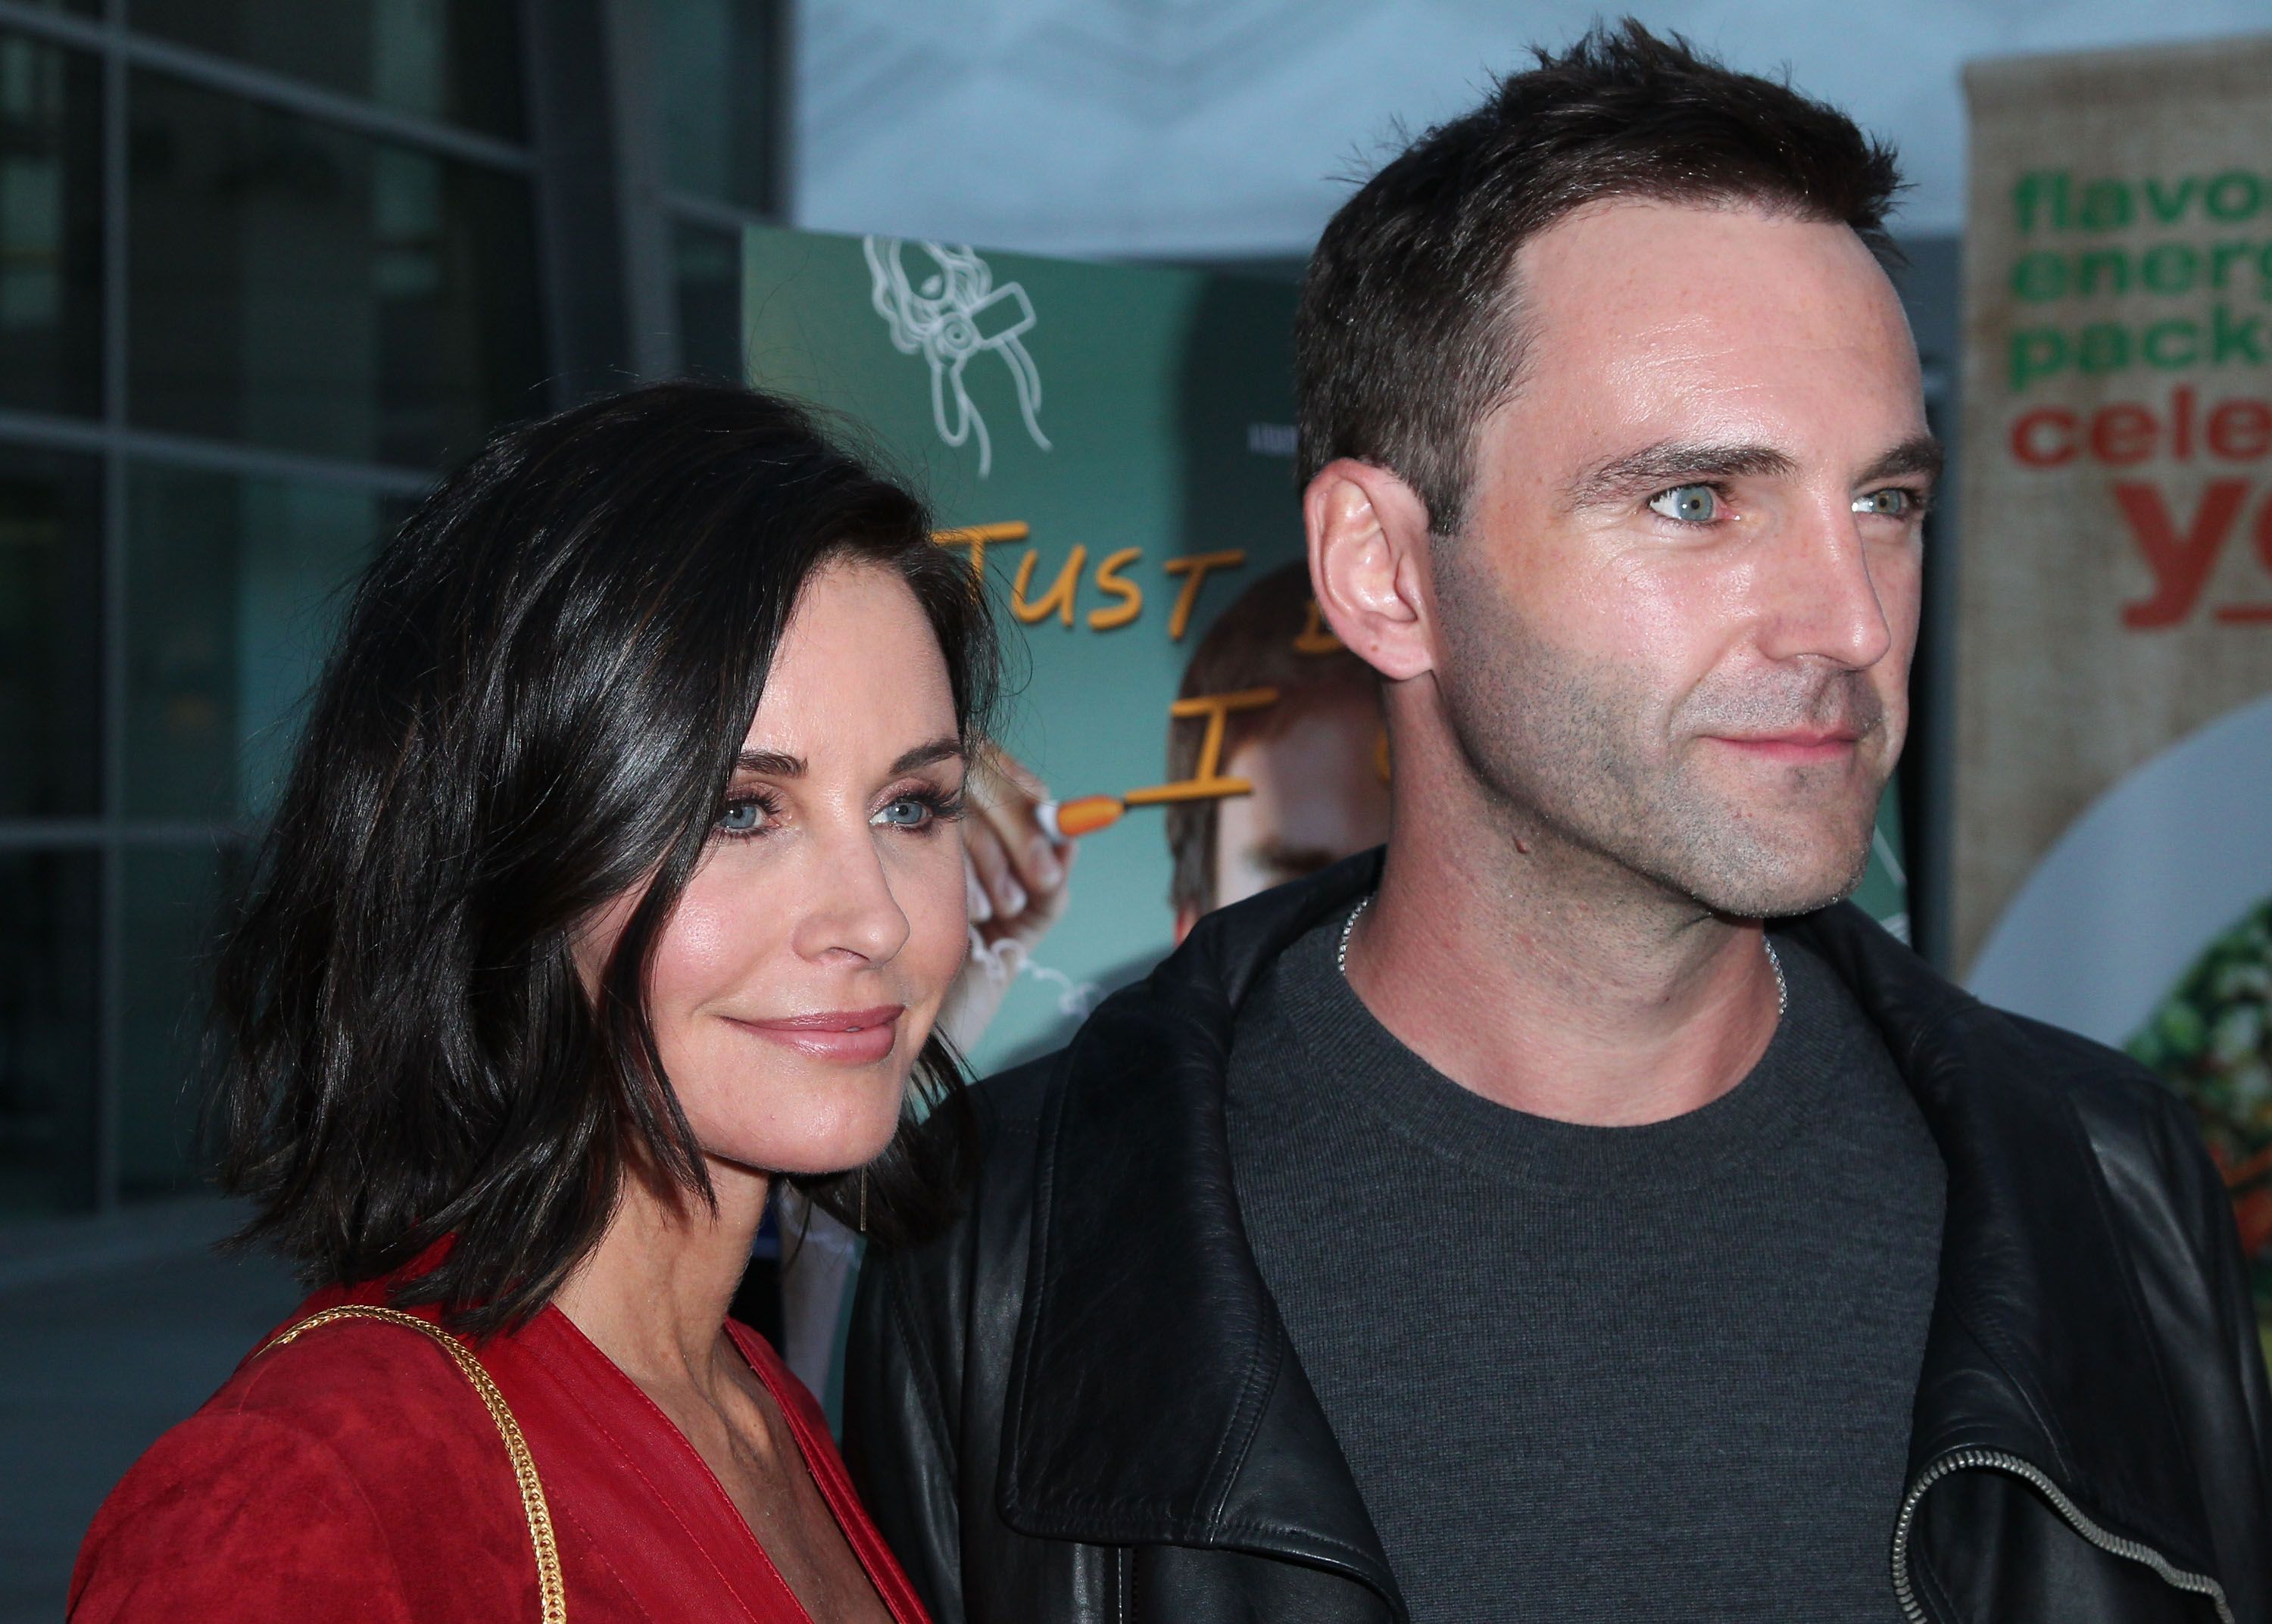 Courteney Cox and Johnny McDaid at the premiere of "Just Before I Go" in 2015 in Hollywood, California | Source: Getty Images